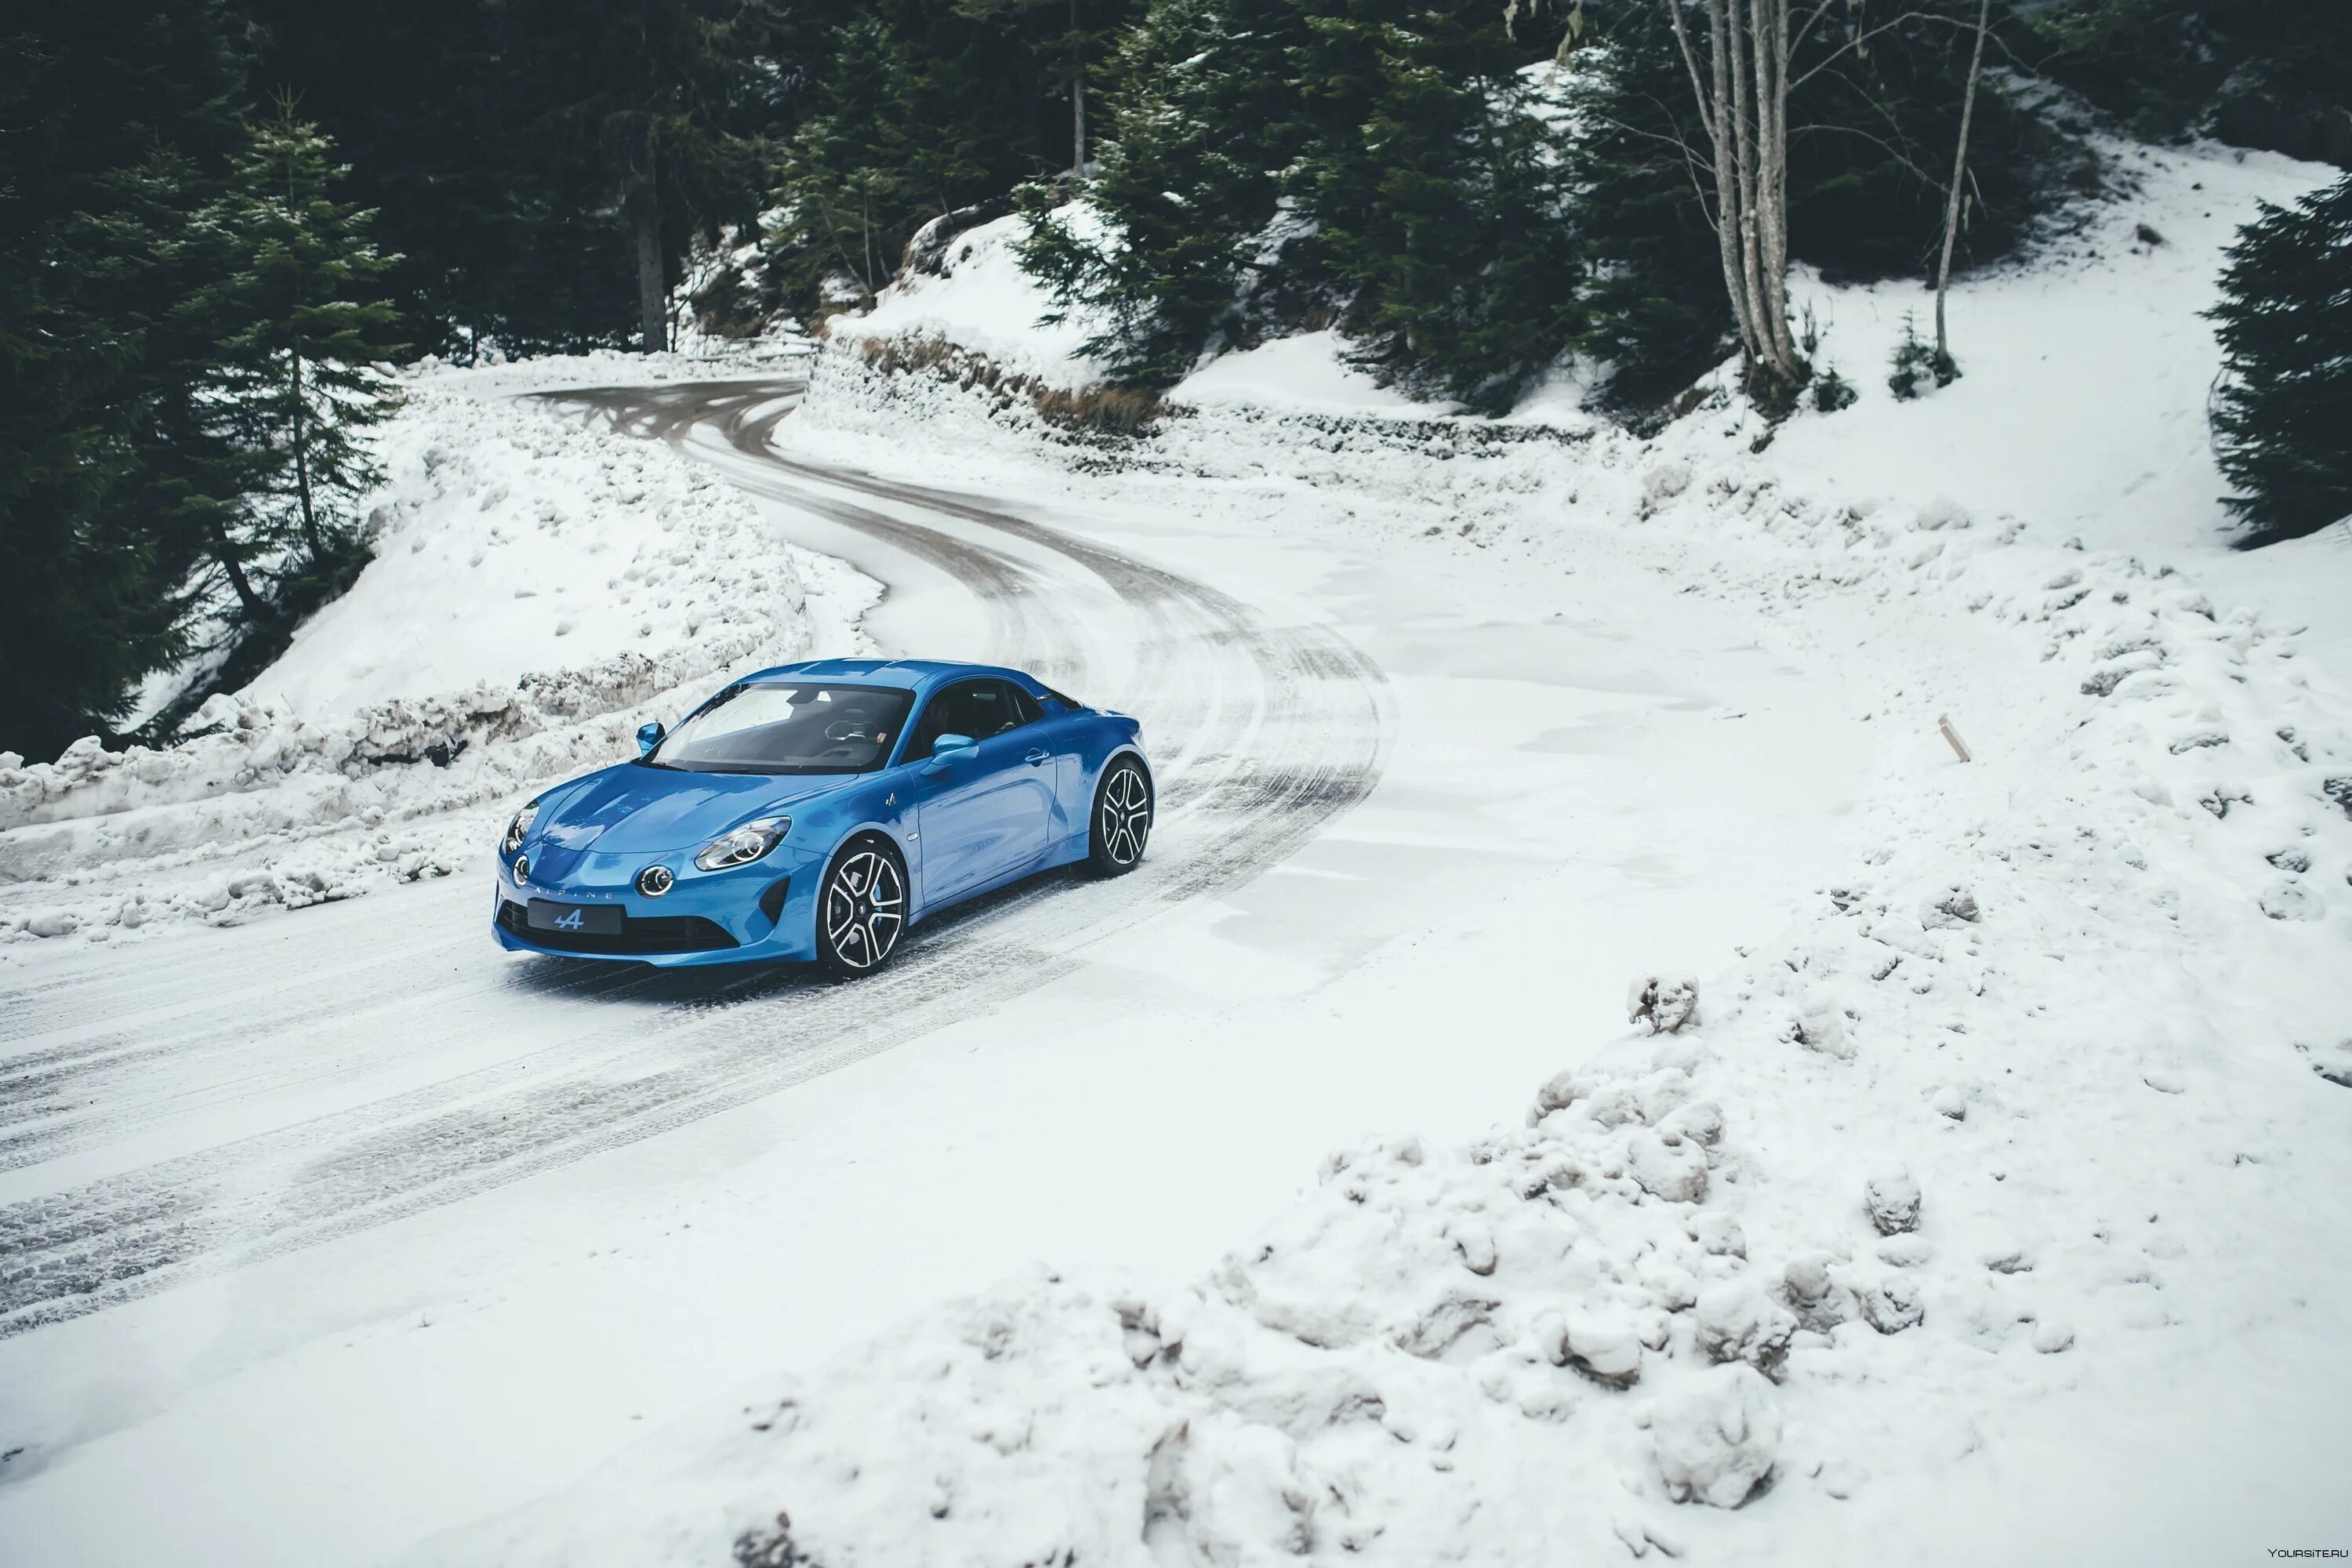 Alpine a110 2017. Alpine a110 Race. Toyota Alpine a110. Alpine a110 in Rally Race.